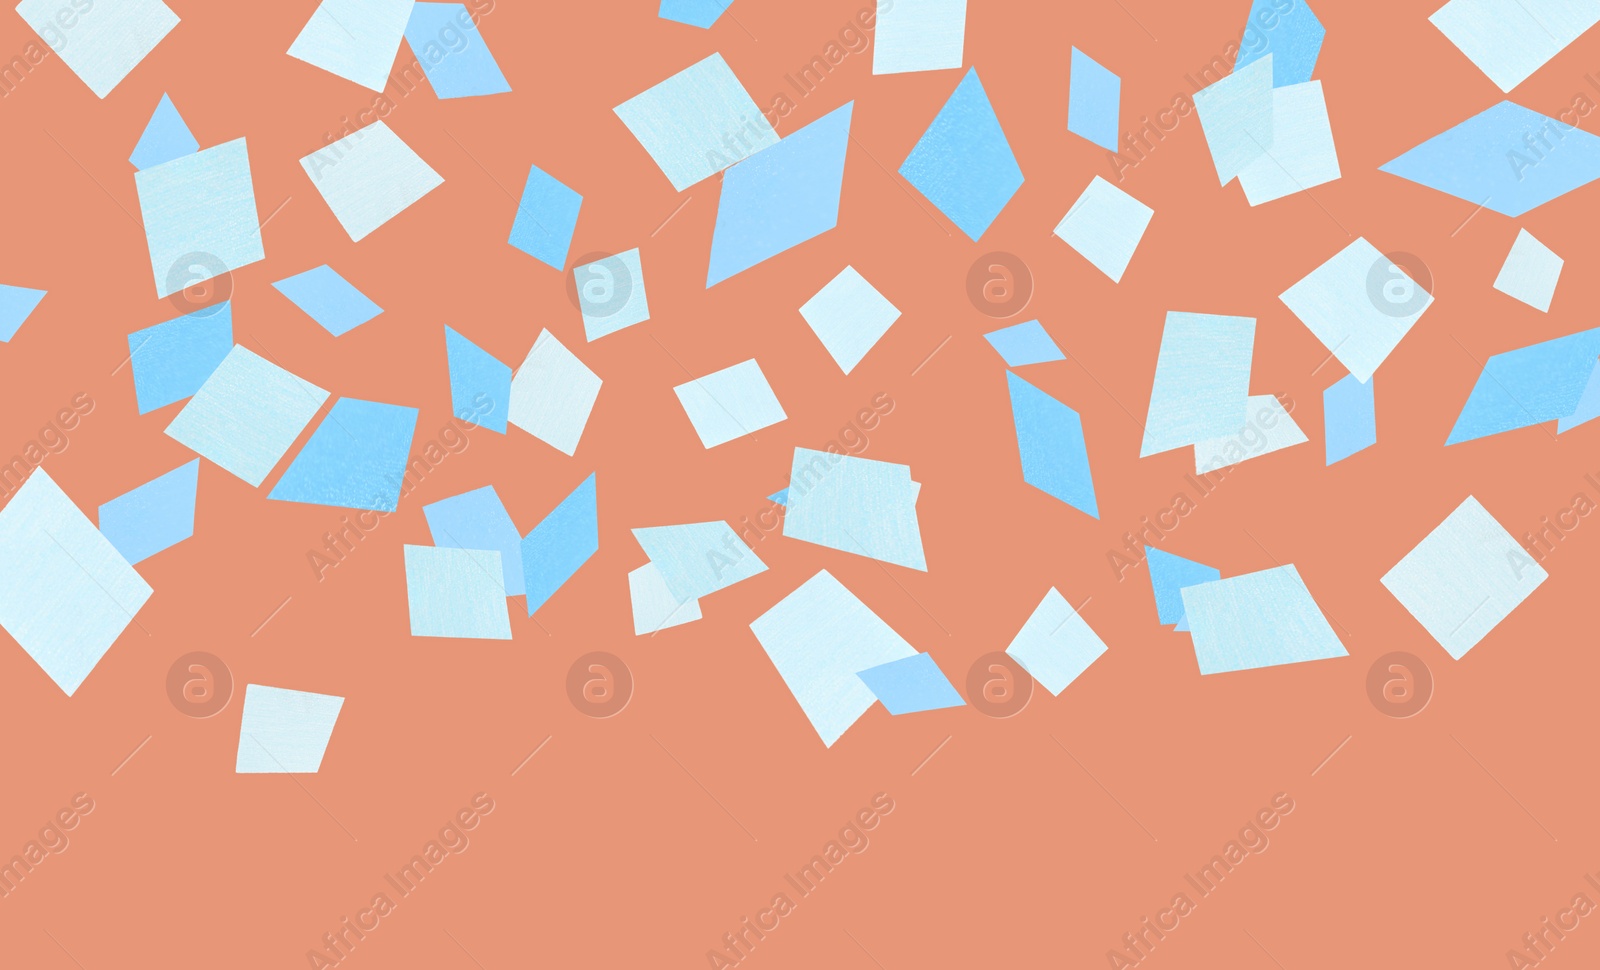 Image of Bright confetti falling on coral background. Banner design